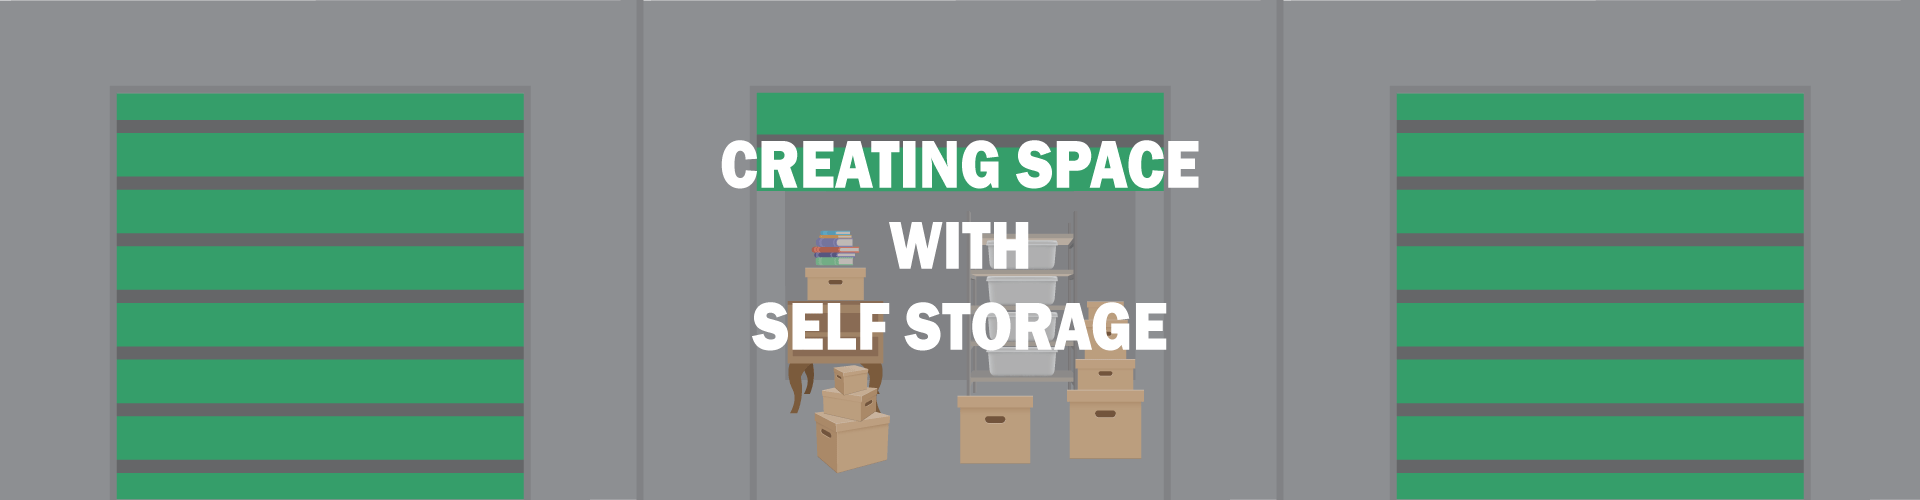 Creating Space With Self Storage